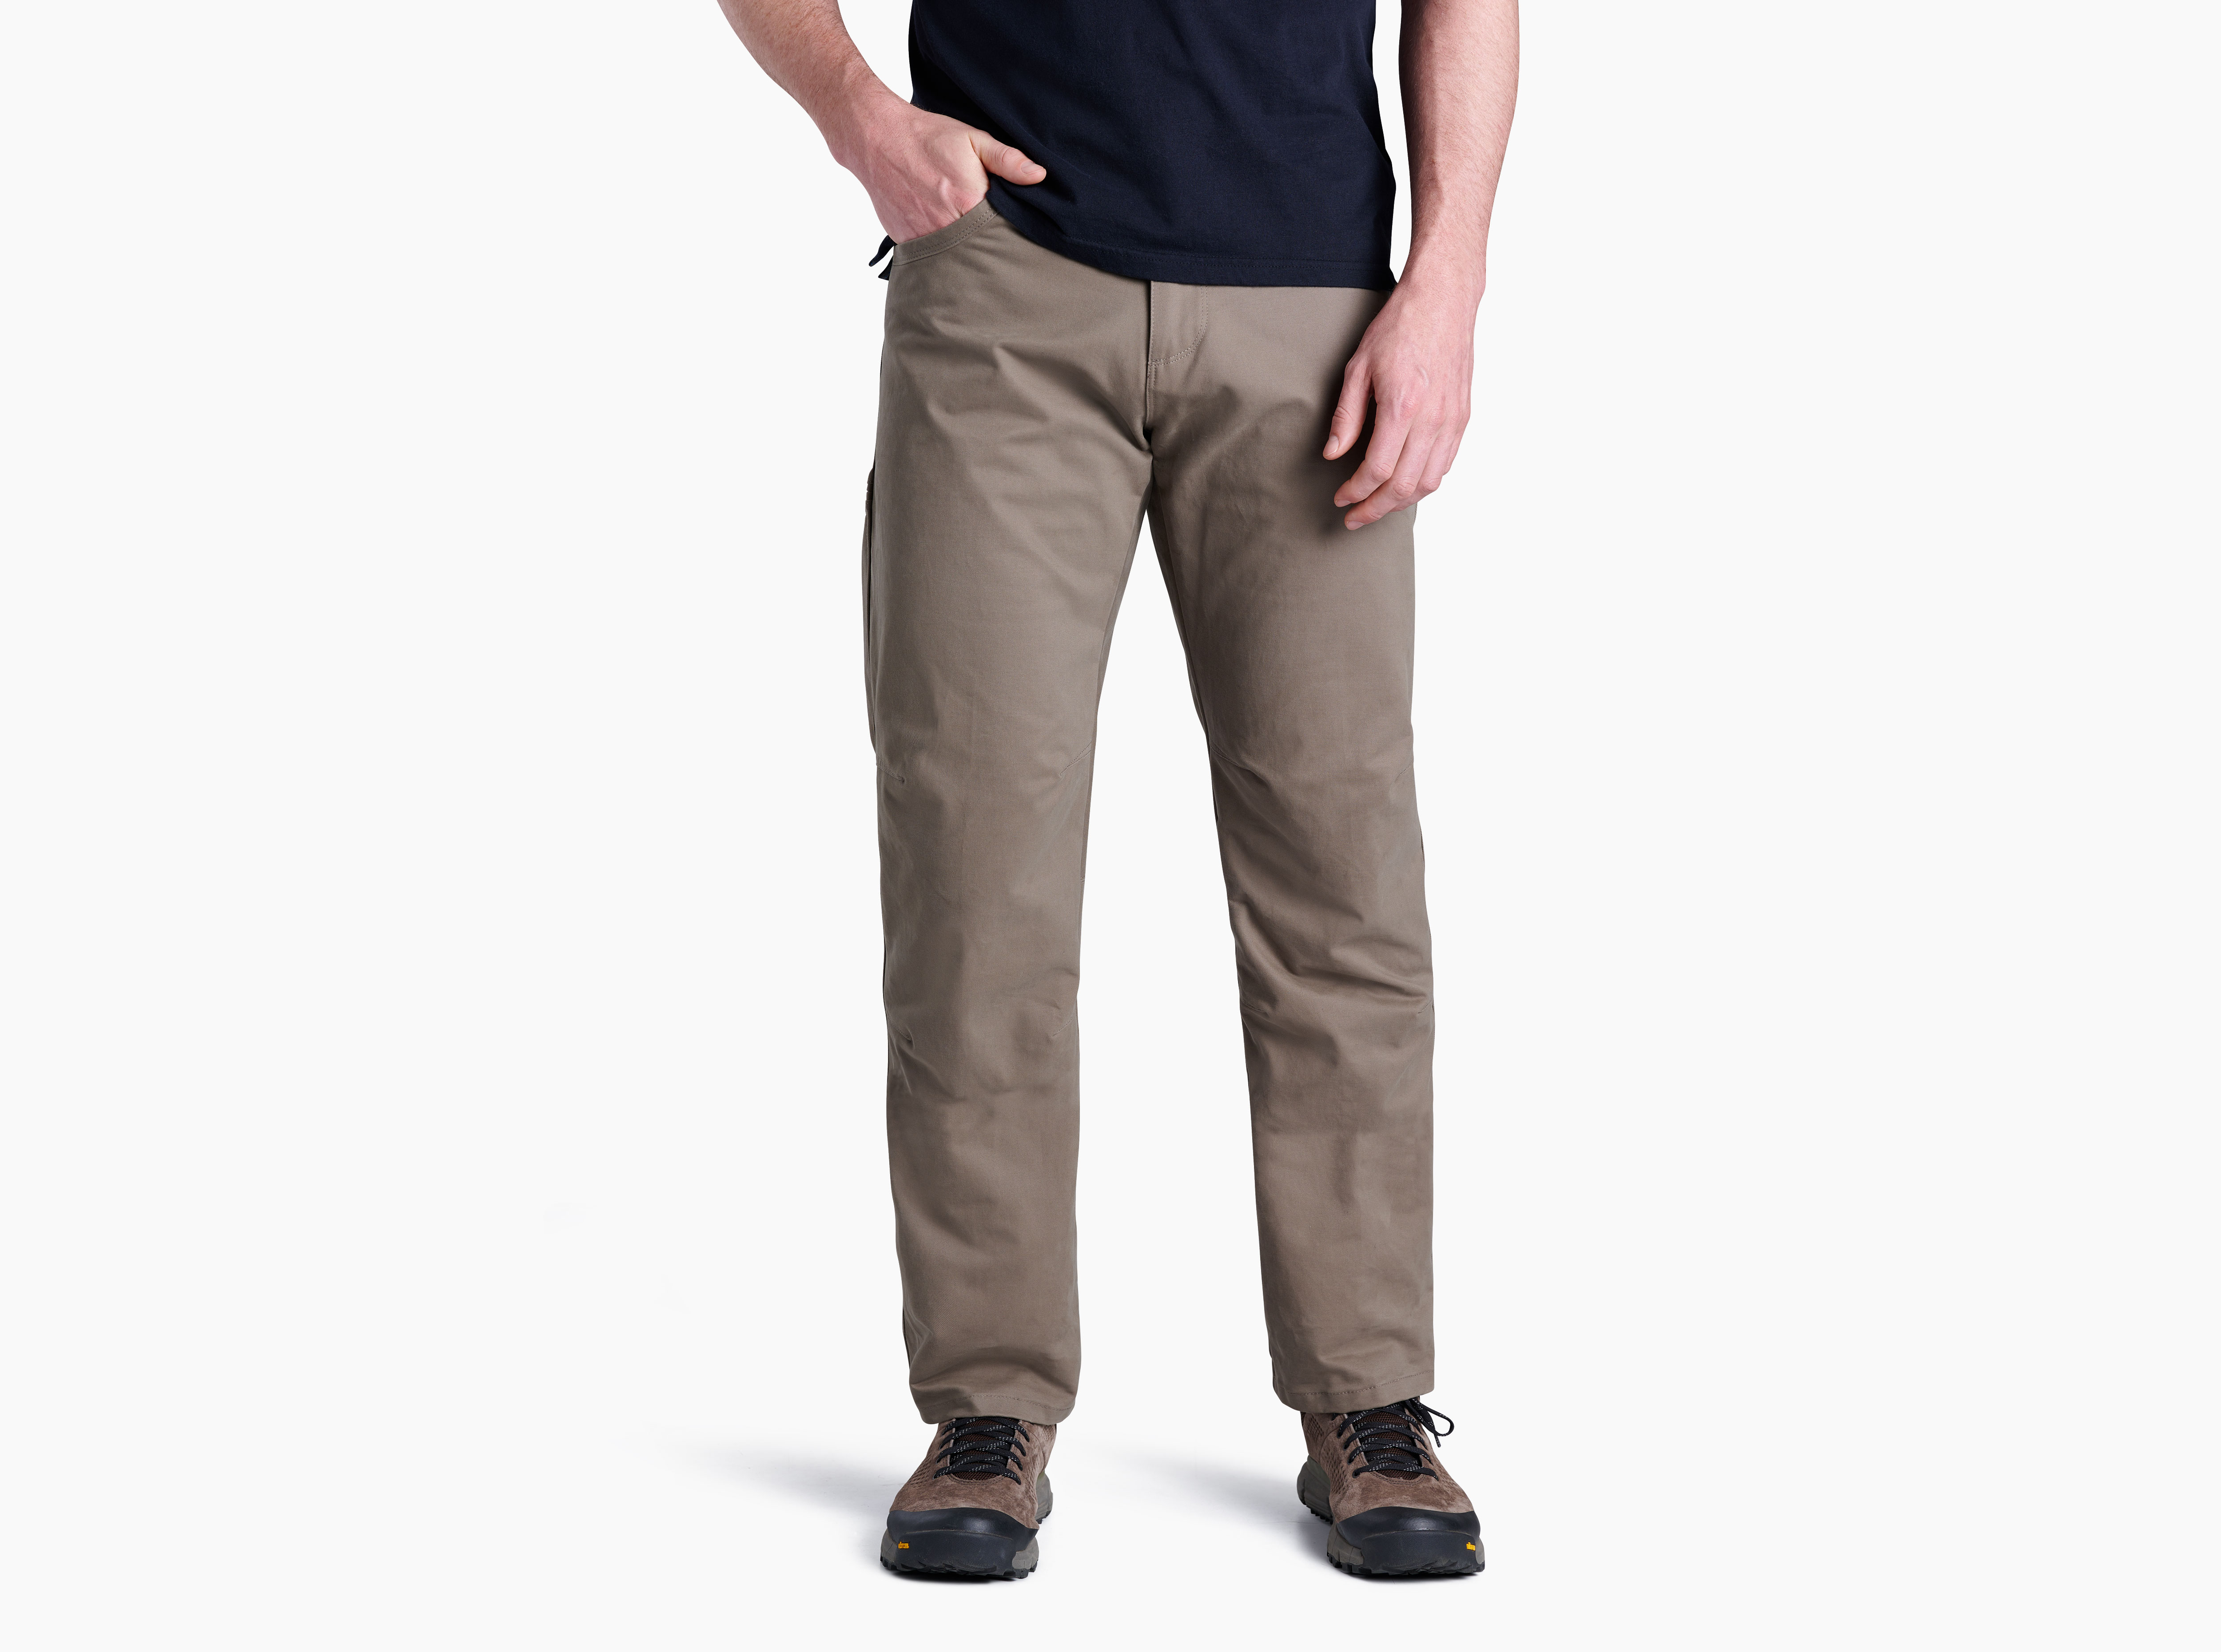 Zeroxposur Fleece Lined Utility Pants, Shop KÜHL men's hiking pants &  casual outdoor pants, like the highly rated KÜHL Revolvr Pant or  trail-ready Resistor Pant.